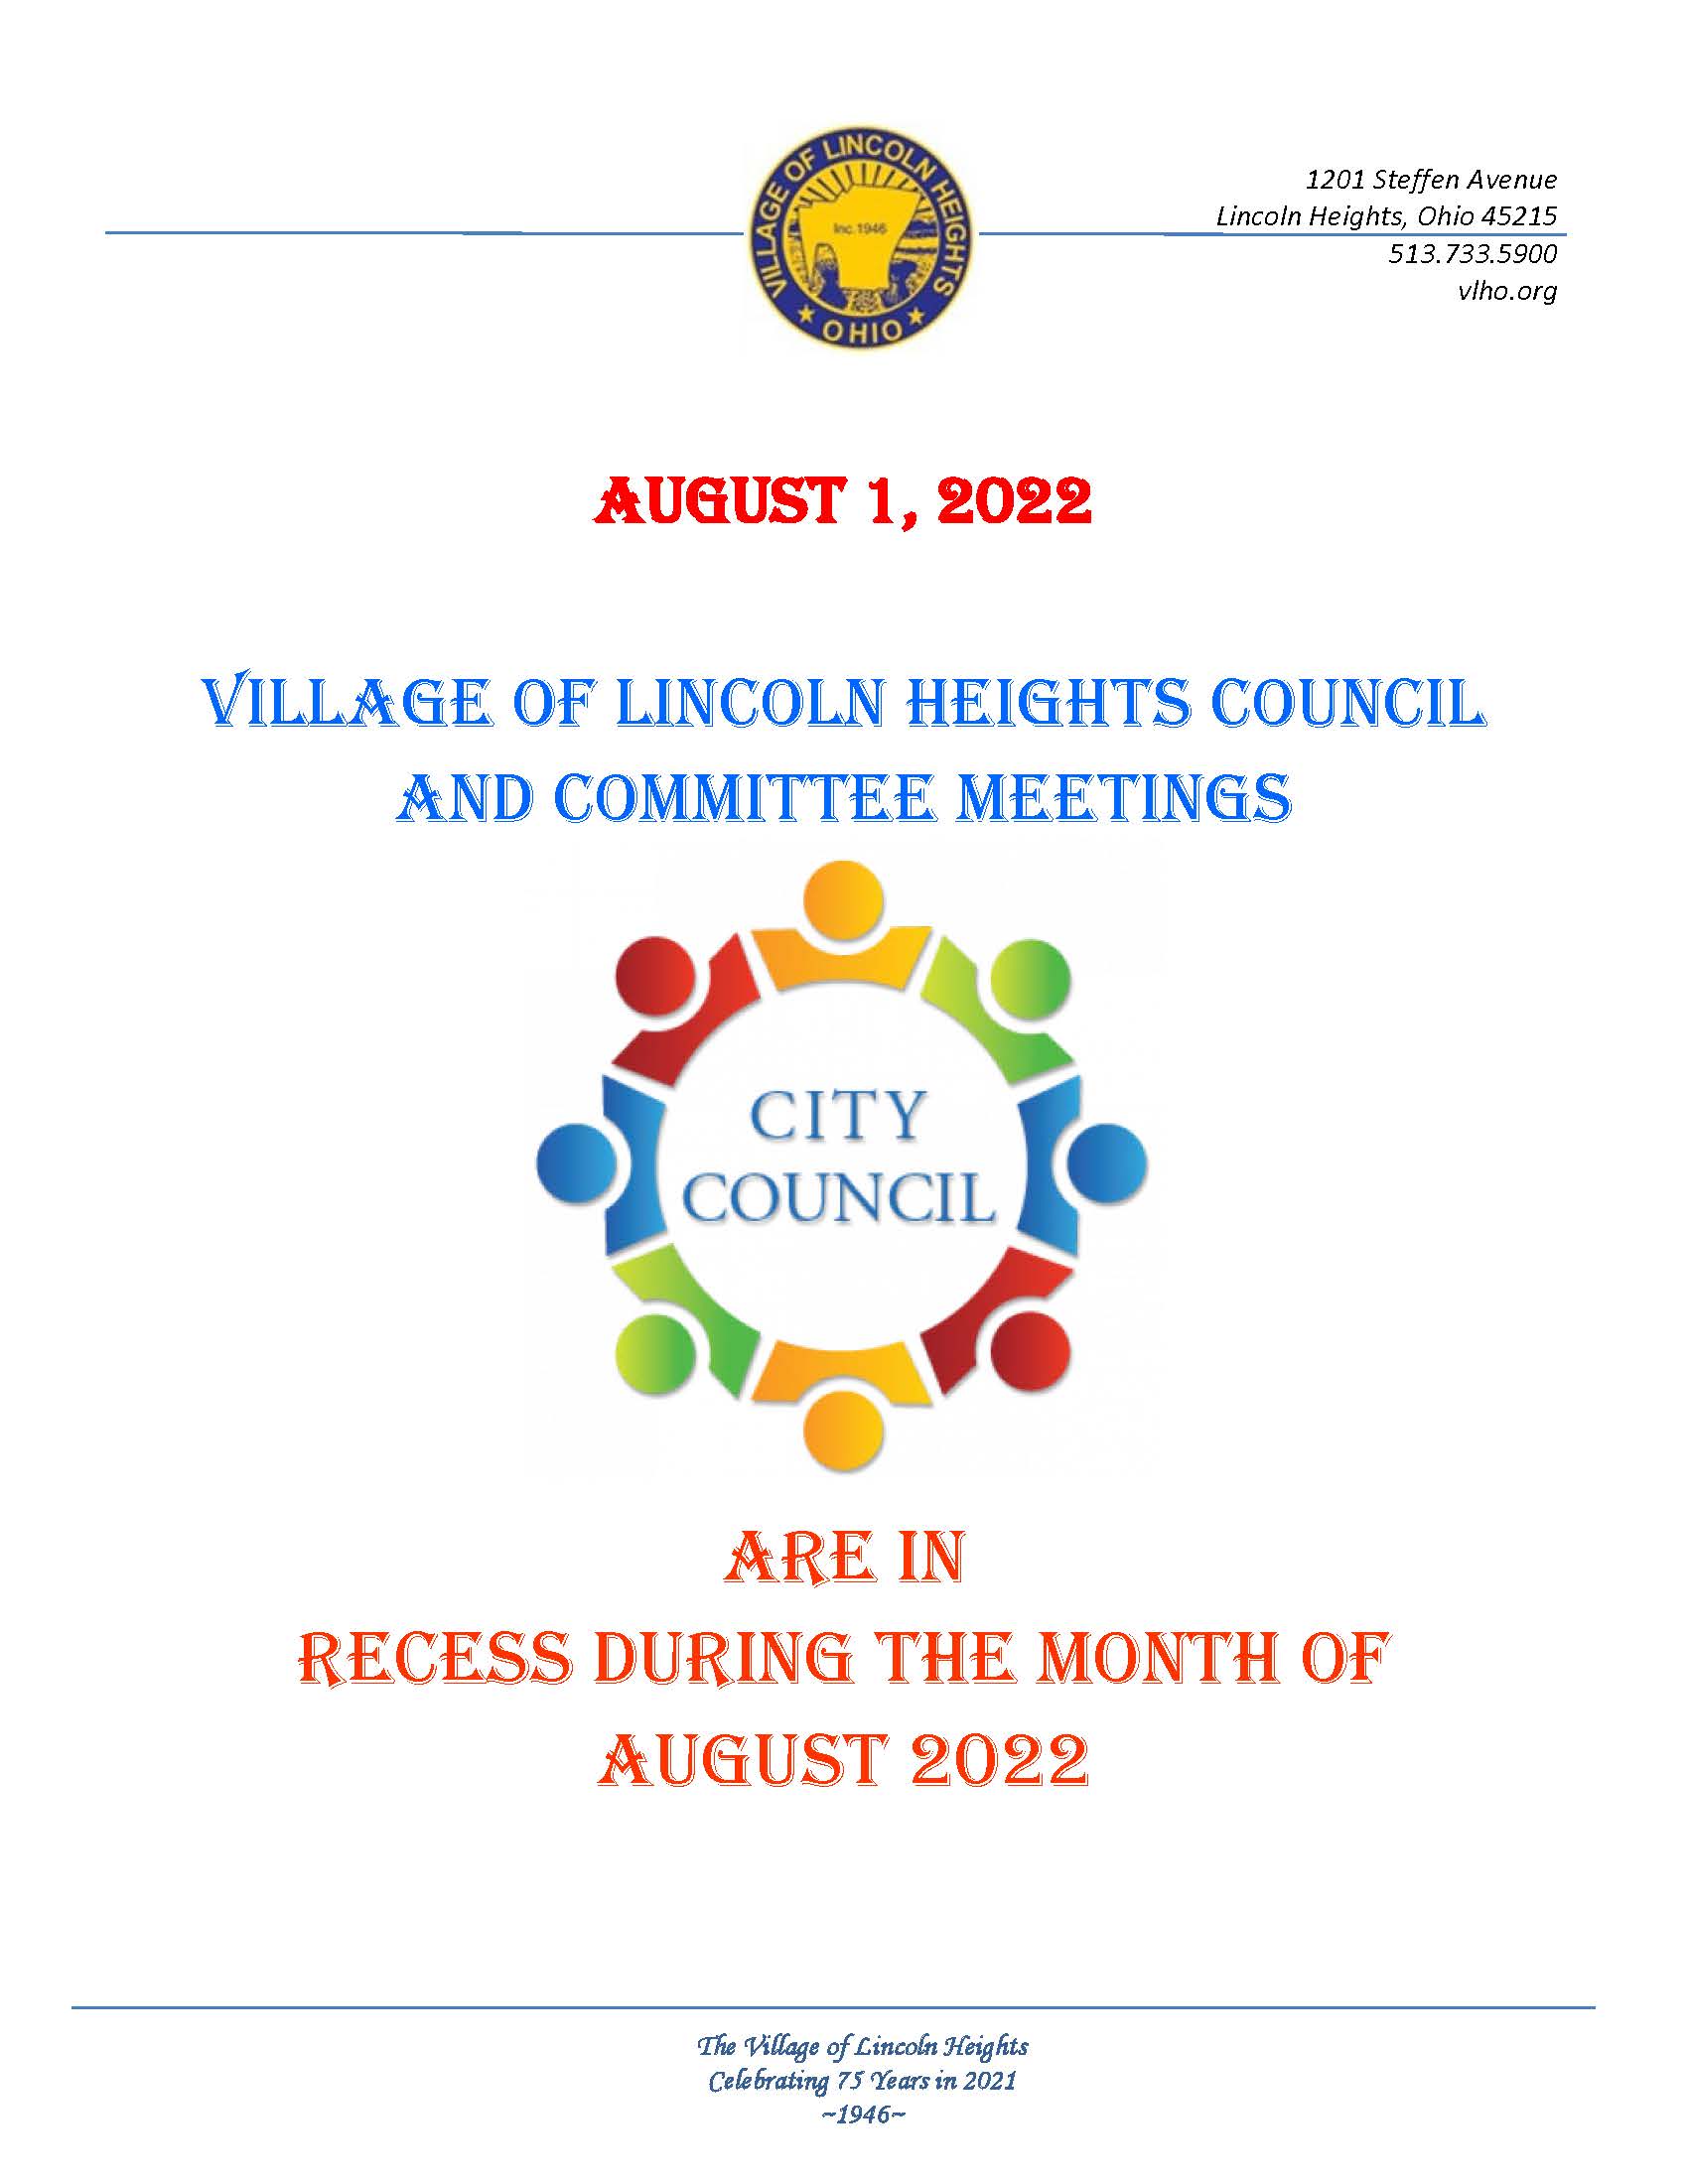 RECESS FLYER ANNOUNCEMENT FOR COUNCIL IN AUGUST 2022